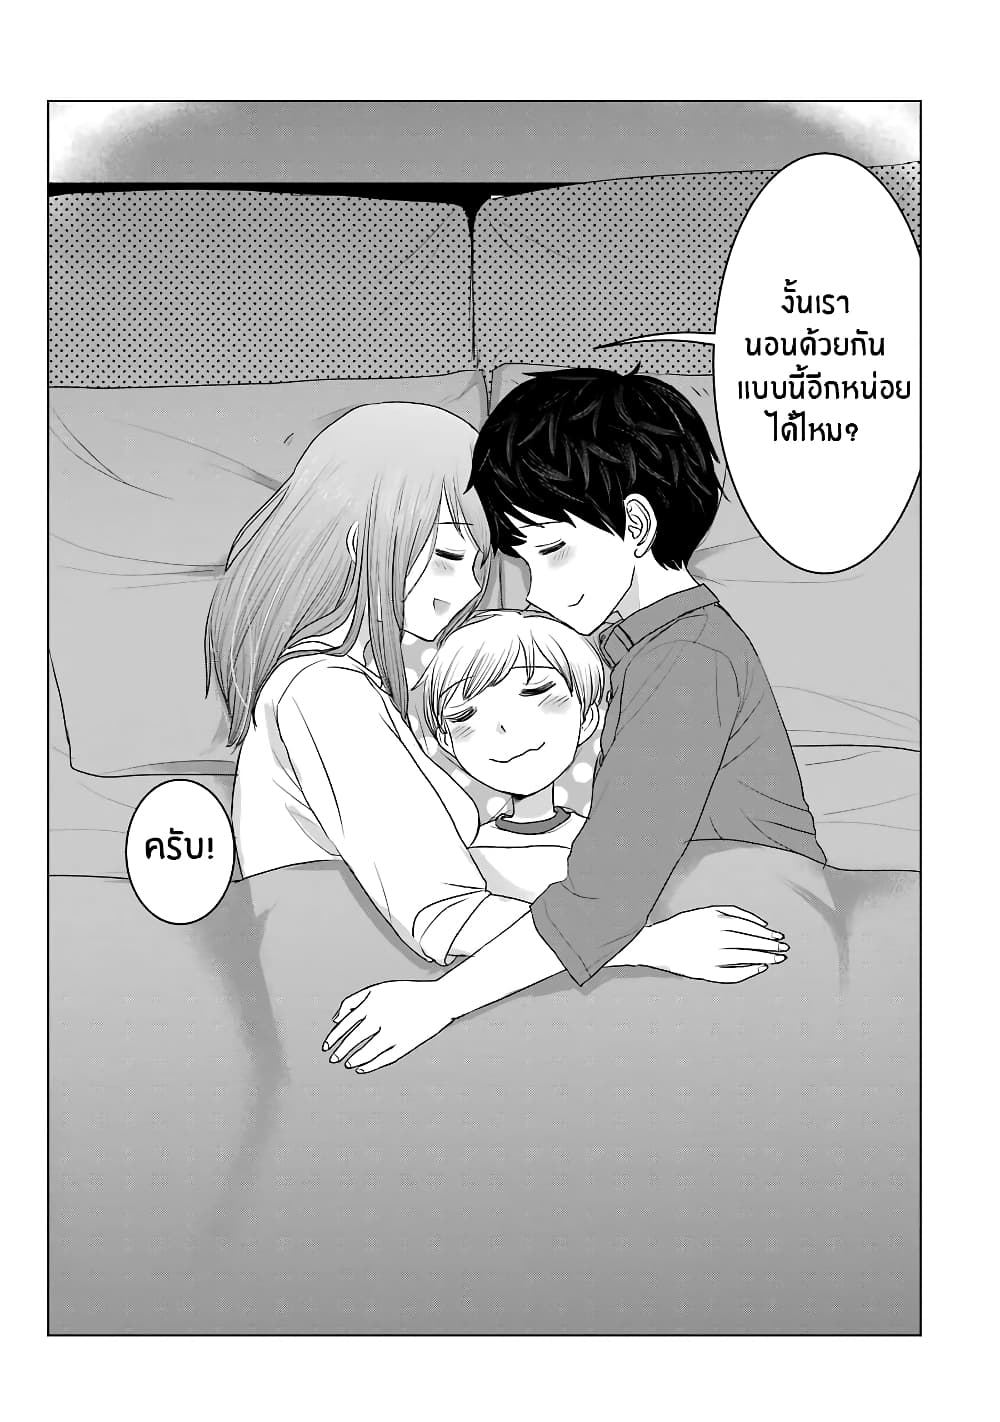 I Want Your Mother to Be with Me! แม่นายฉันขอนะ! - ตอนเเถมพิเศษ - 2